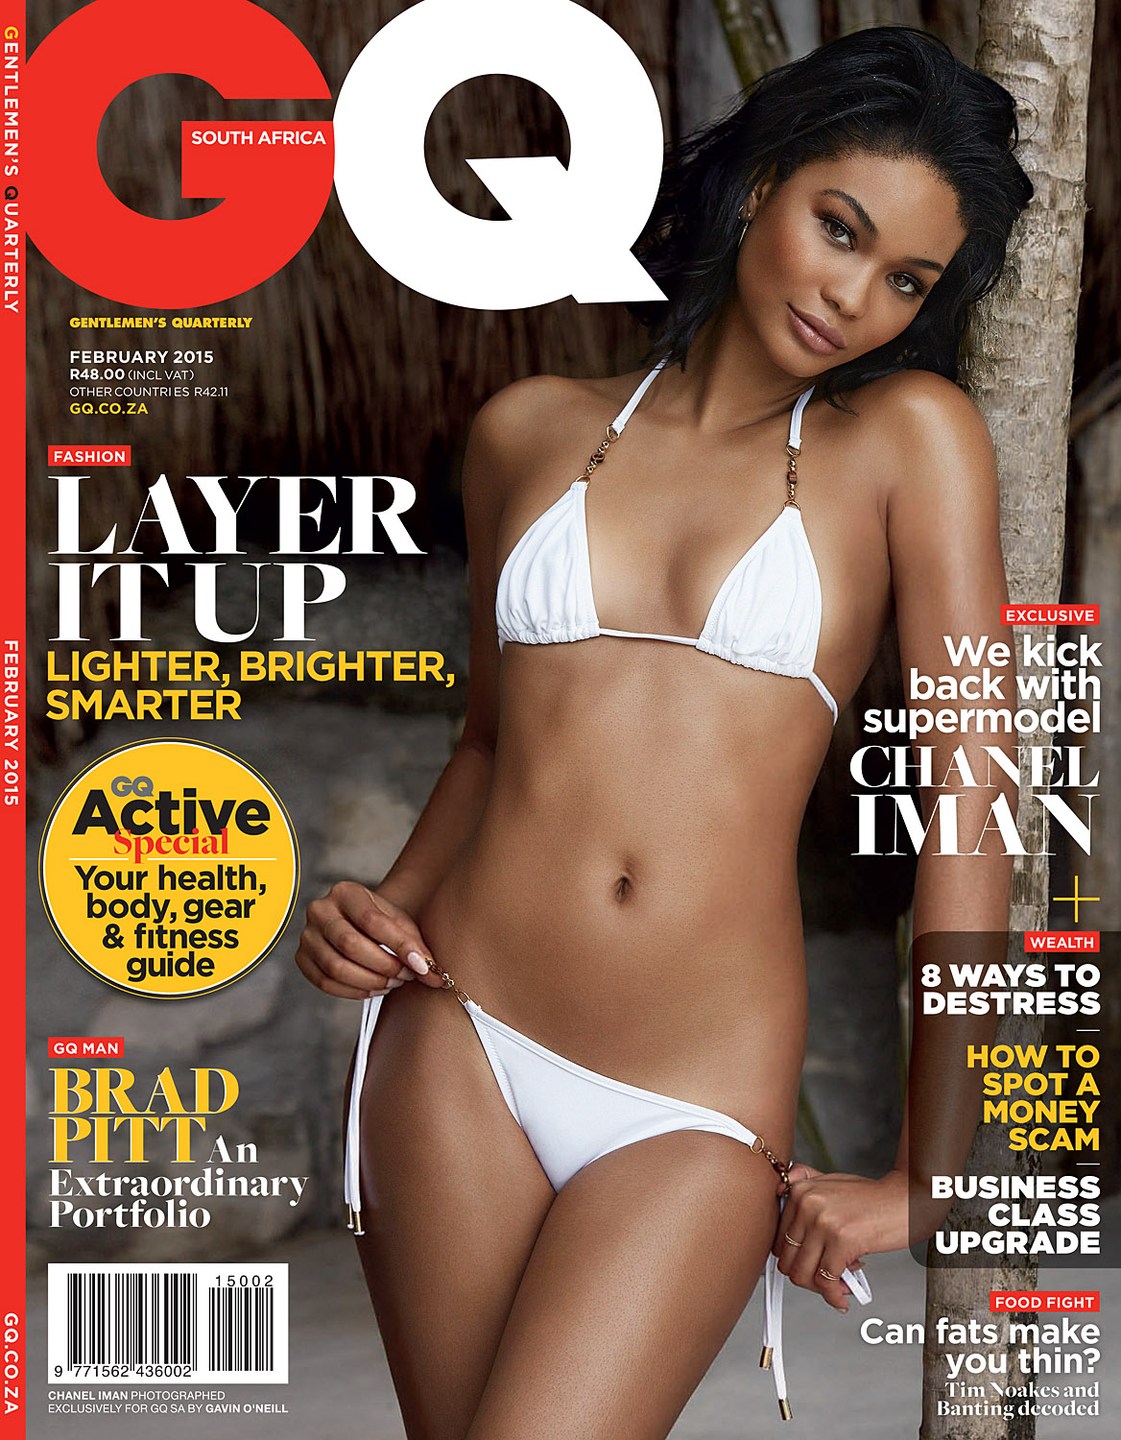 Chanel Iman for GQ Magazine South Africa